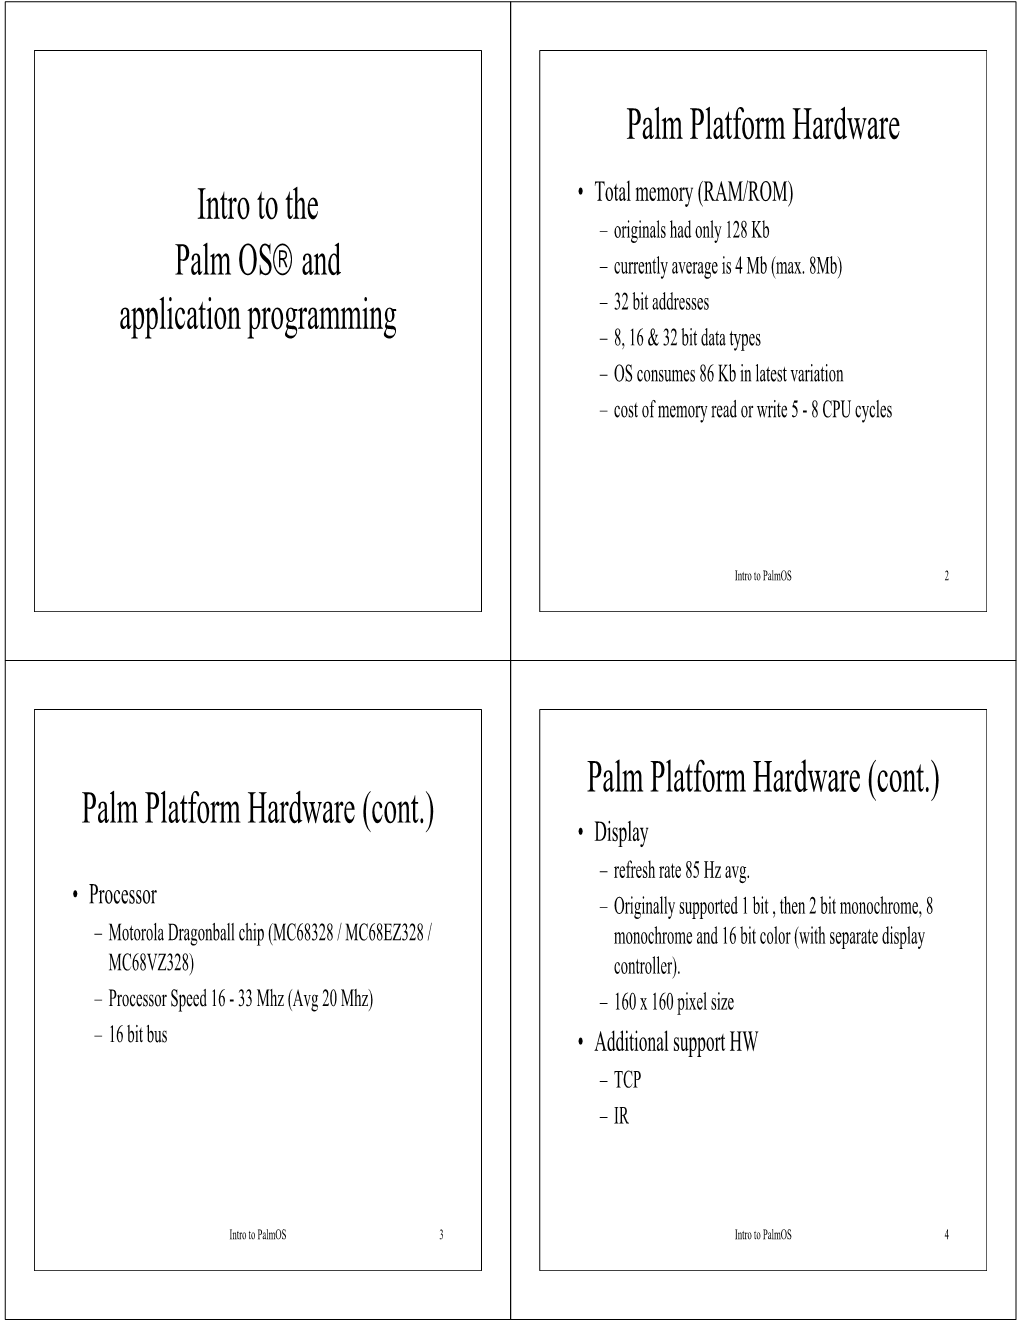 Intro to the Palm OS® and Application Programming Palm Platform